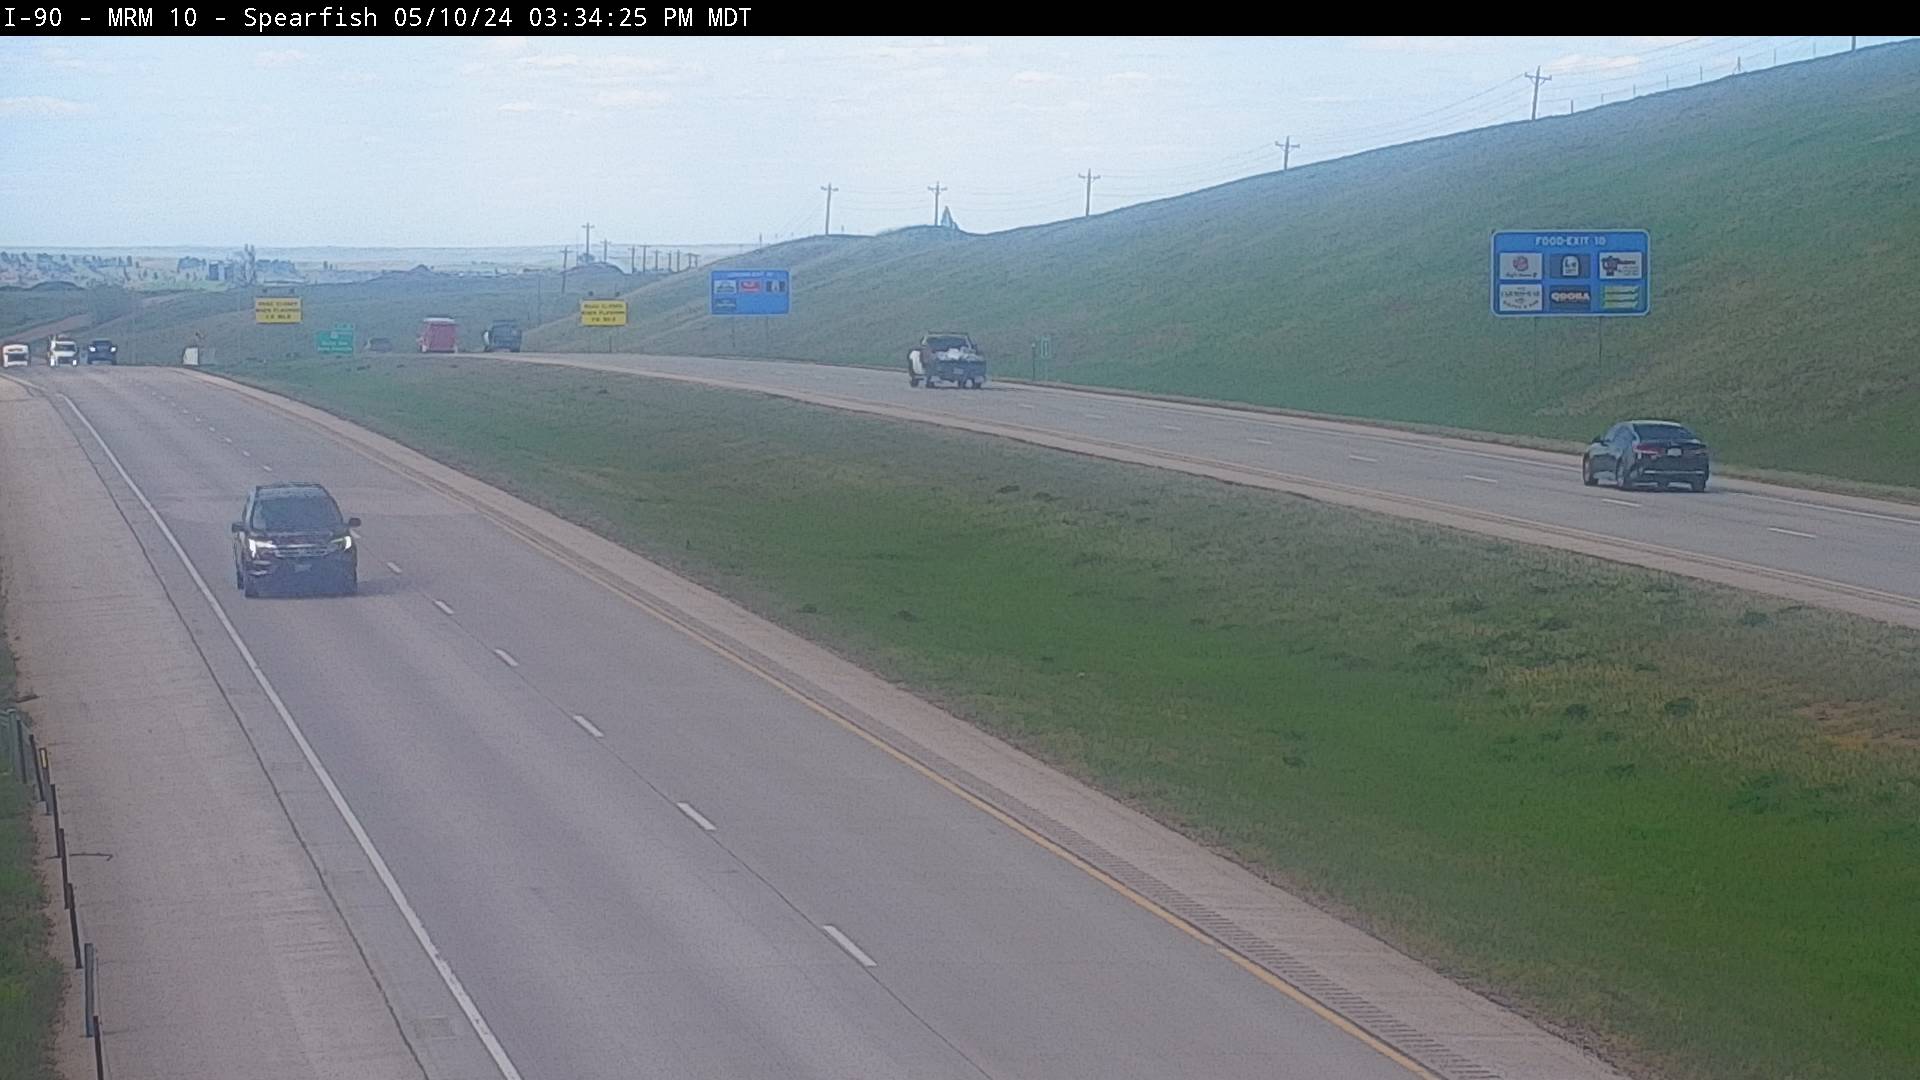 West of town along I-90 @ MP 11 - East Traffic Camera